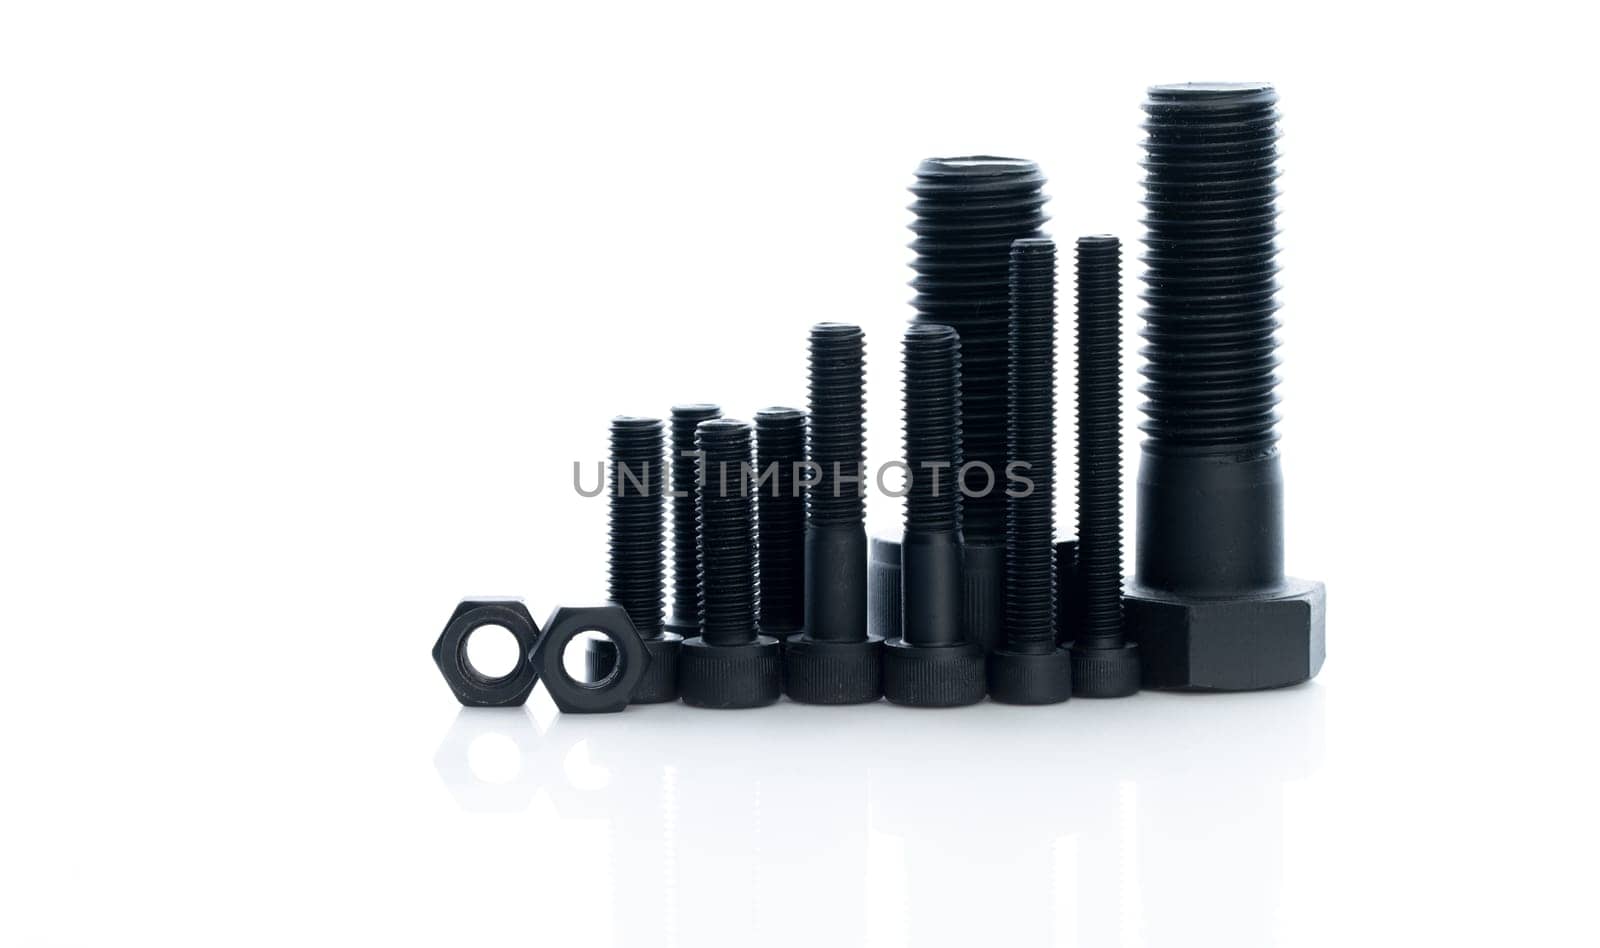 Black bolts and nuts isolated on white background. Industrial fasteners. Hardware tools. Stud bolt, hex nuts, and hex head bolts. Threaded fastener use in automotive engineering. Metal fasteners. by Fahroni